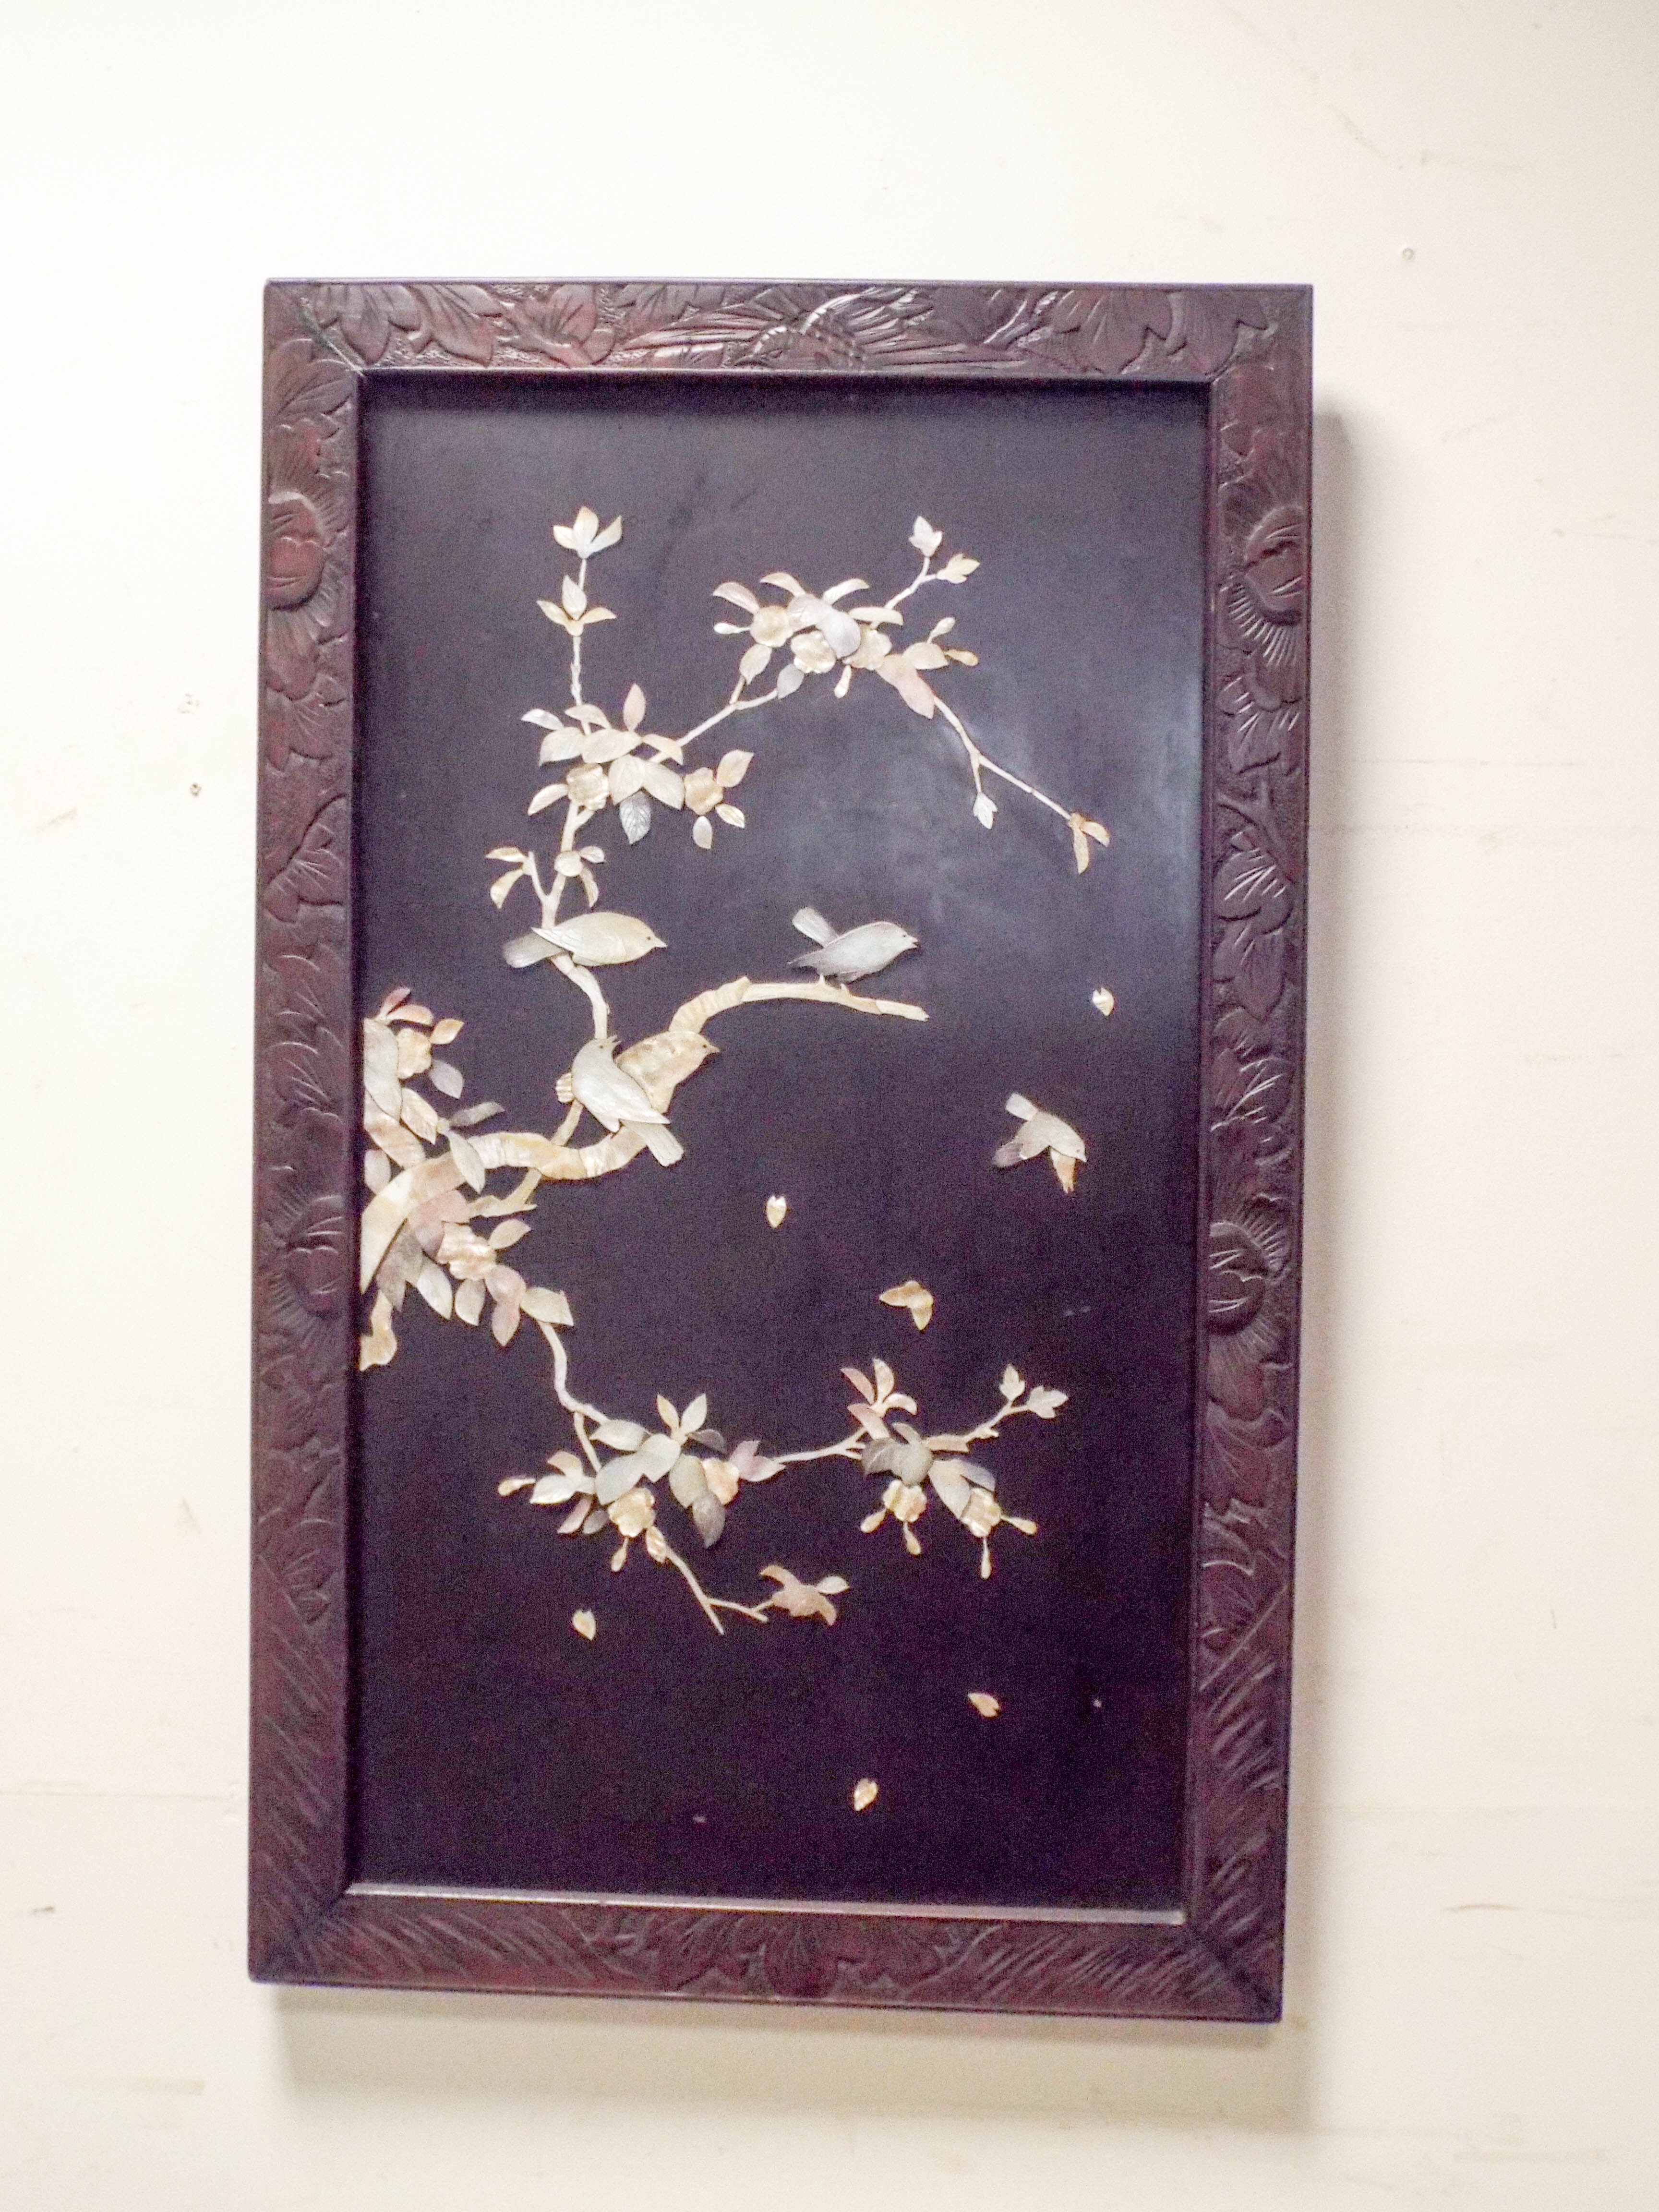 Pair of Japanese mother of pearl inlaid and decorated lacquer wall plaques